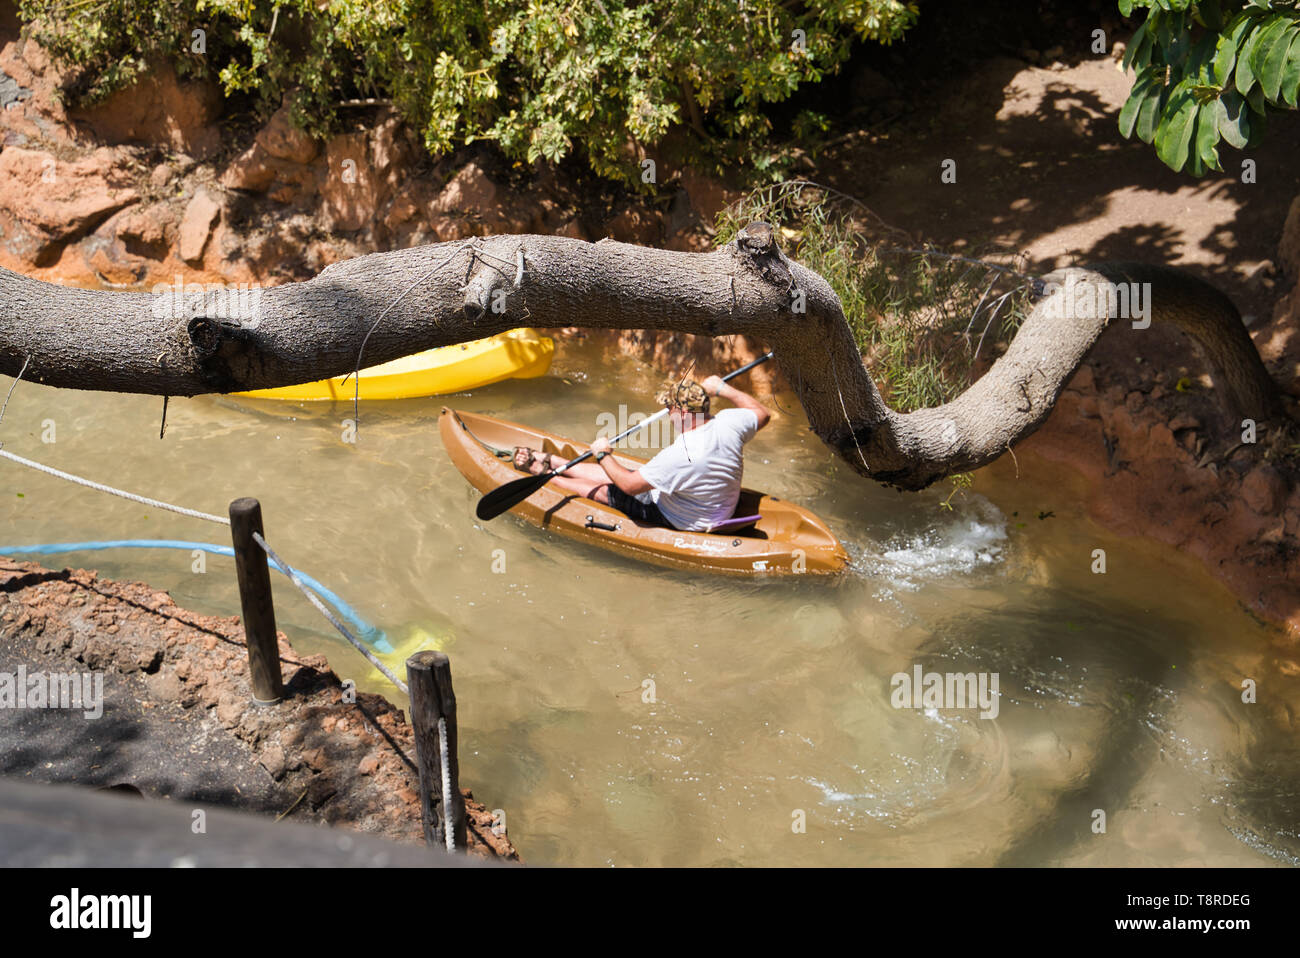 LANZAROTE, CANARY ISLANDS, SPAIN - APRIL 15, 2019: Themed Rancho Texas Park  on Lanzarote Island. Kayaking down the river Stock Photo - Alamy